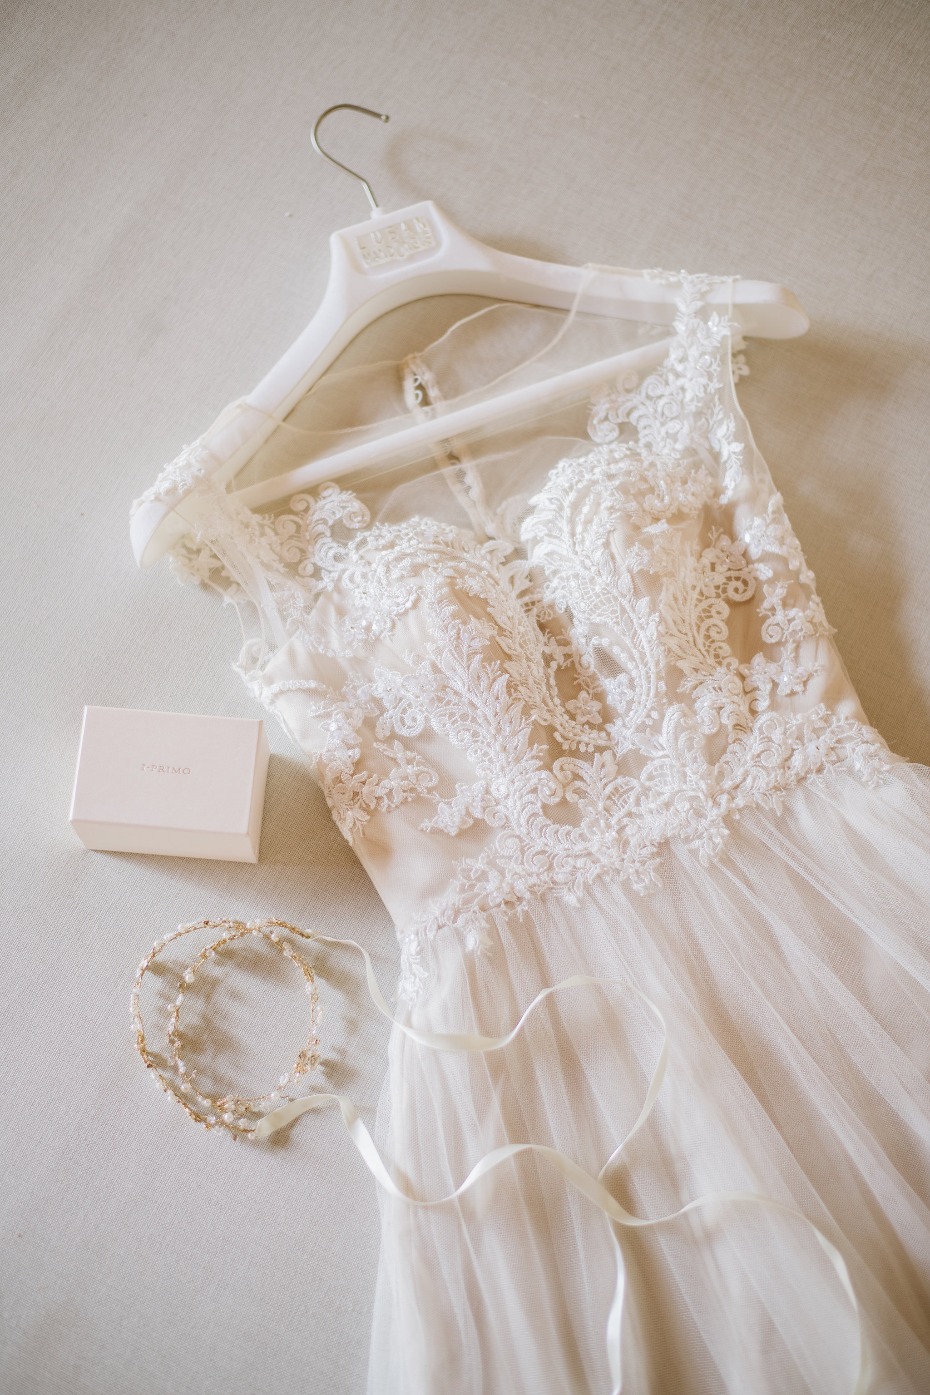 Embellished wedding gown by Lusan Mandongus